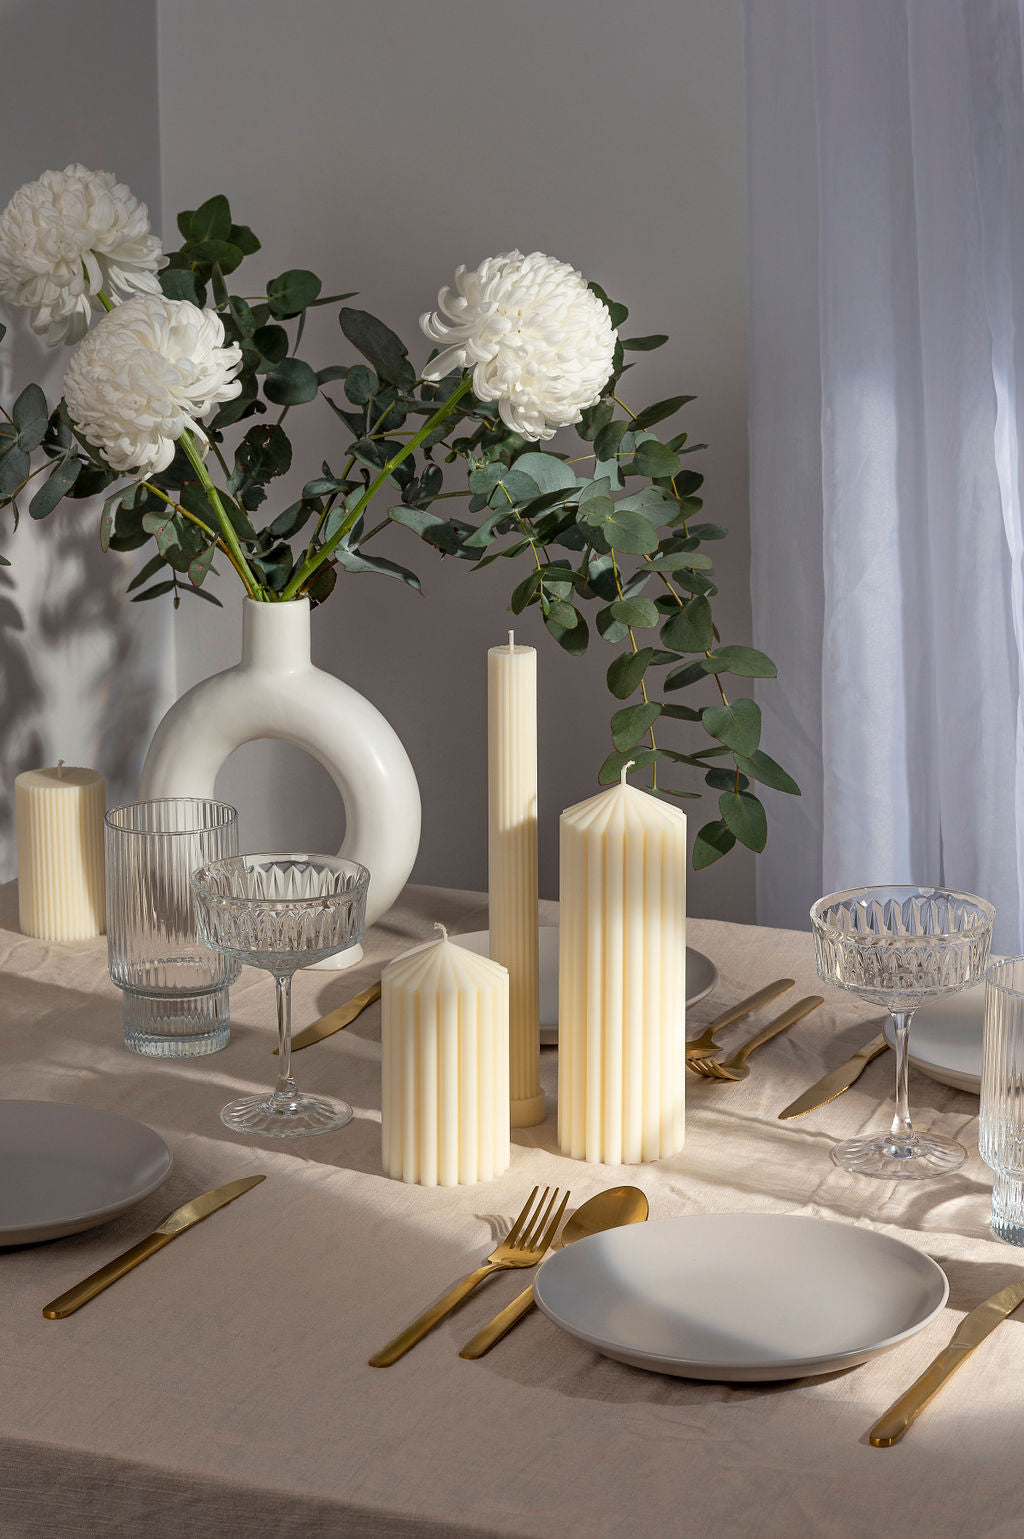 Creating a Warm and Welcoming Atmosphere with Tall Pillar Candles